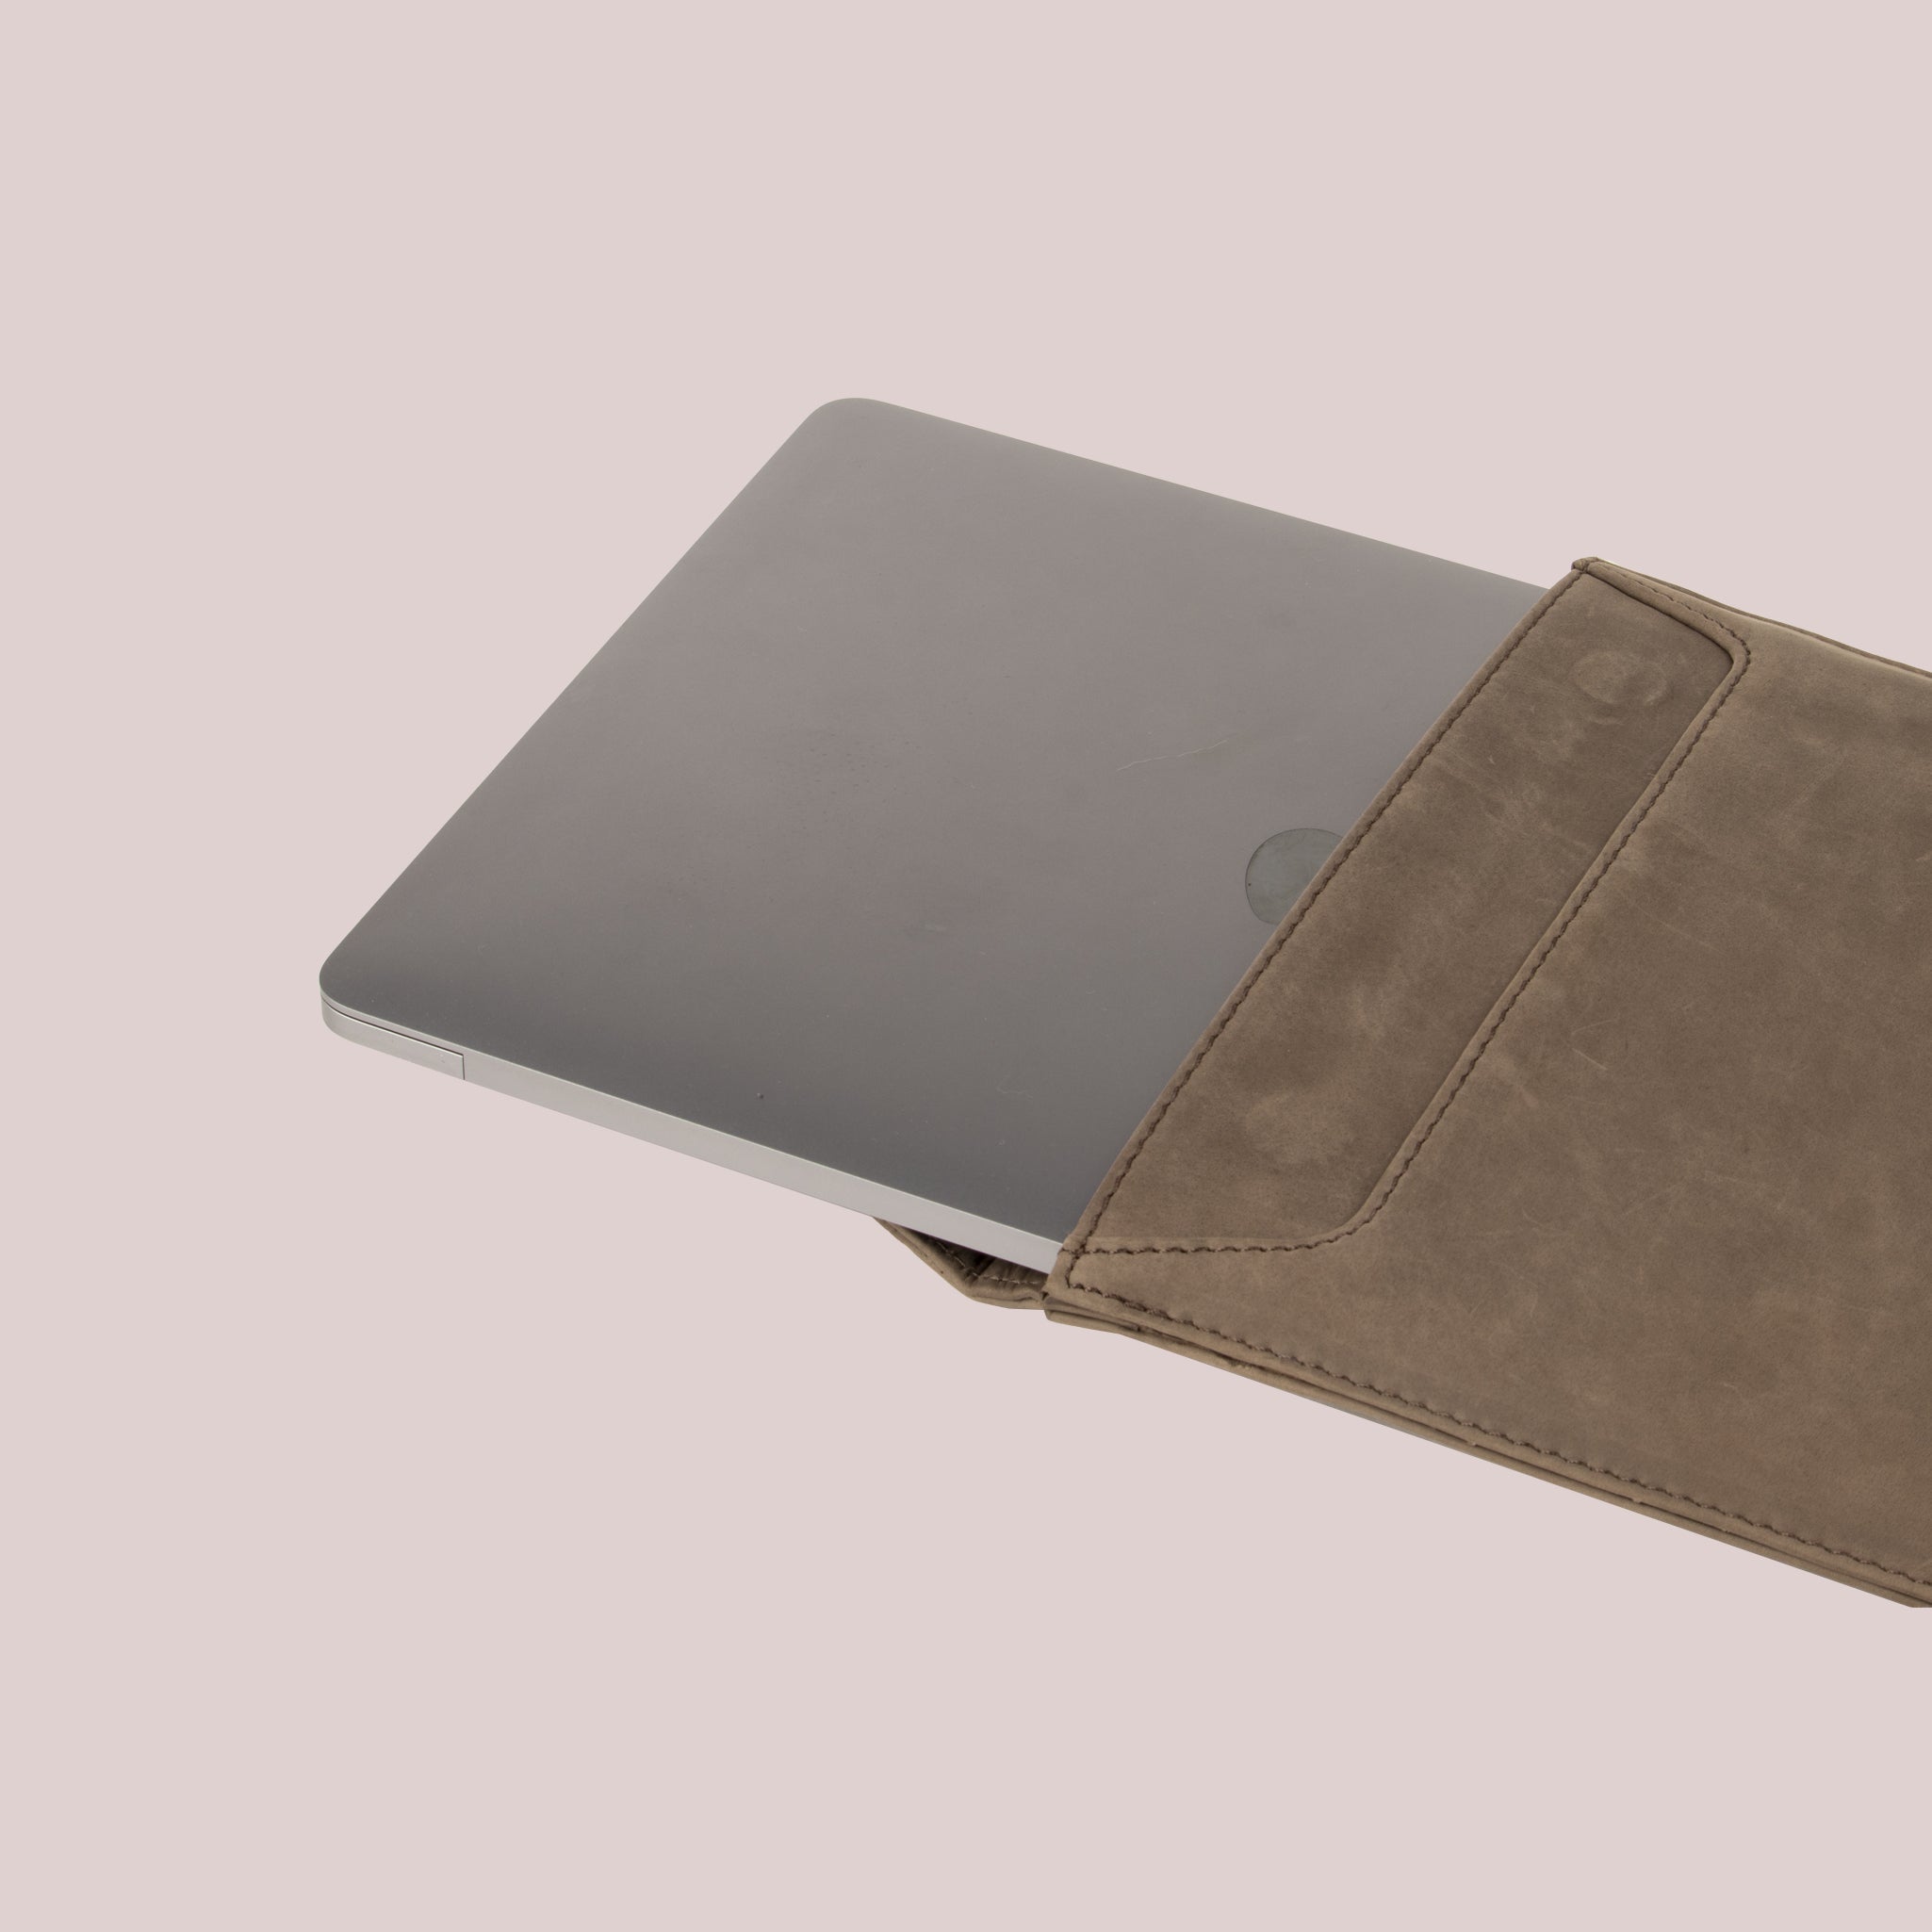 Purchase grey leather sleeve for Macbook laptops